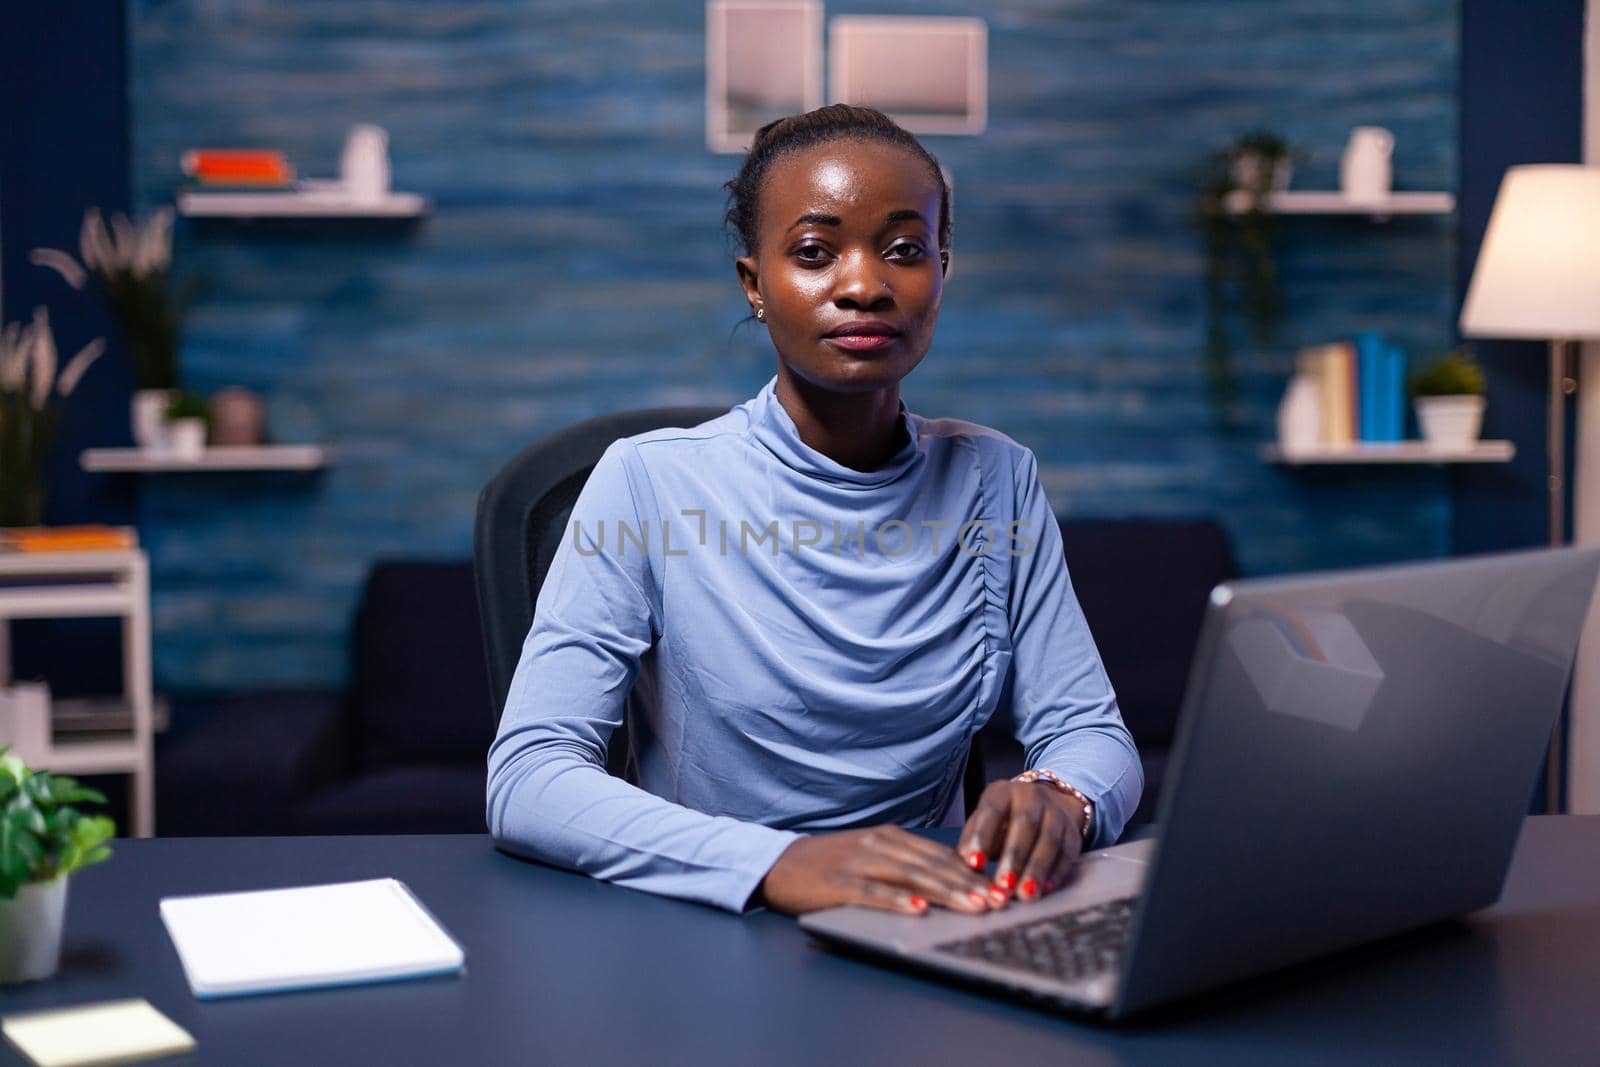 African businesswoman holding hands on keyboard while working from home late at night. Black entrepreneur sitting in personal workplace writing on keyboard.